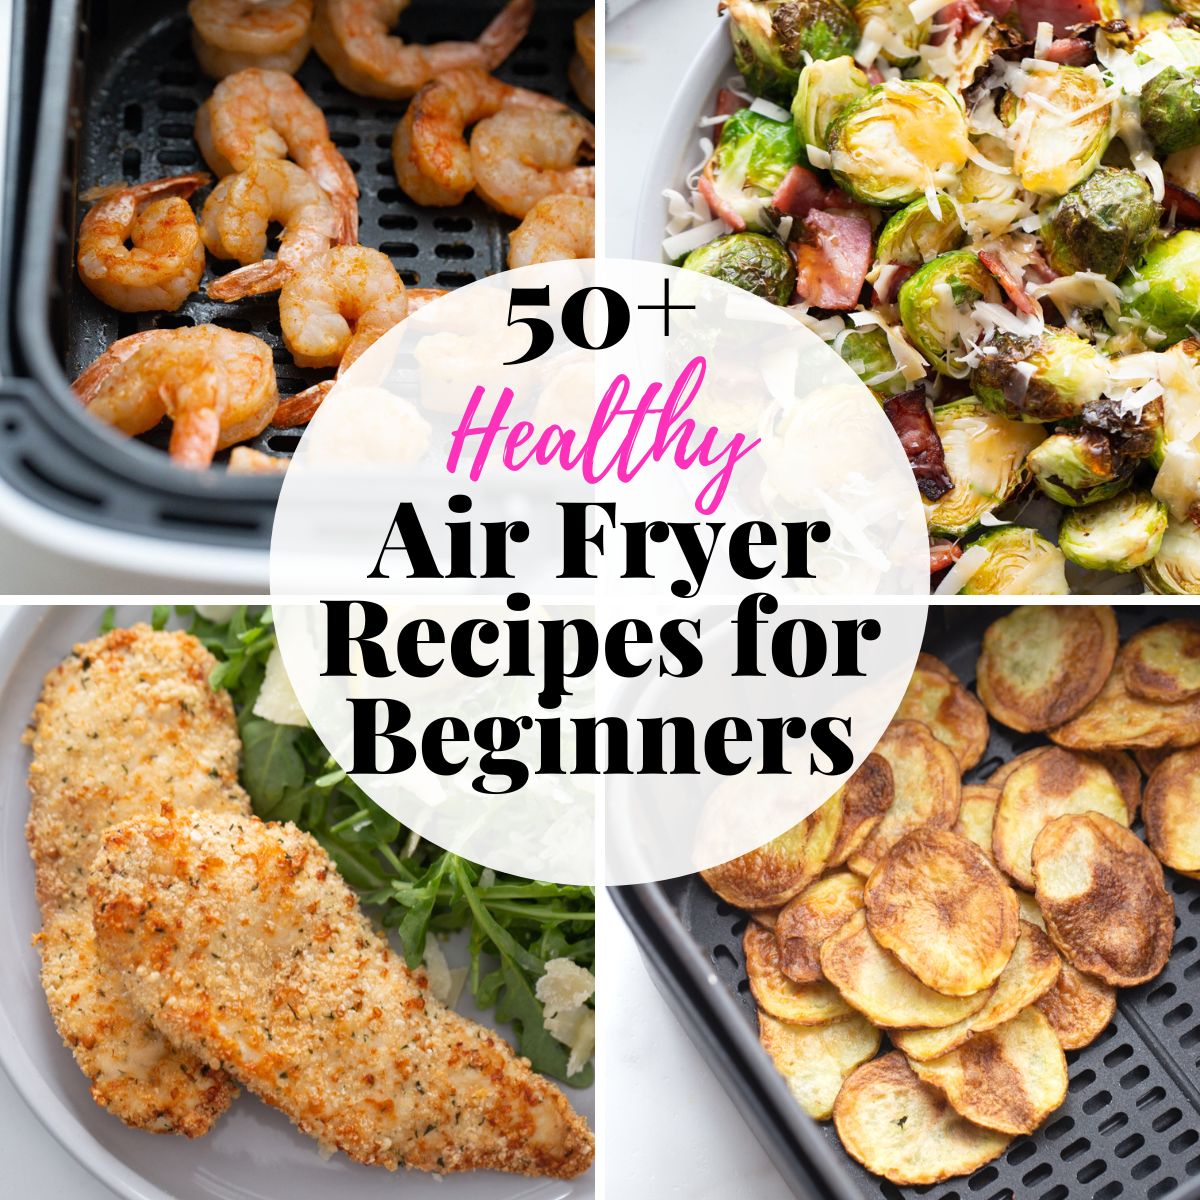 Featured image for post 50 healthy air fryer recipes for beginners